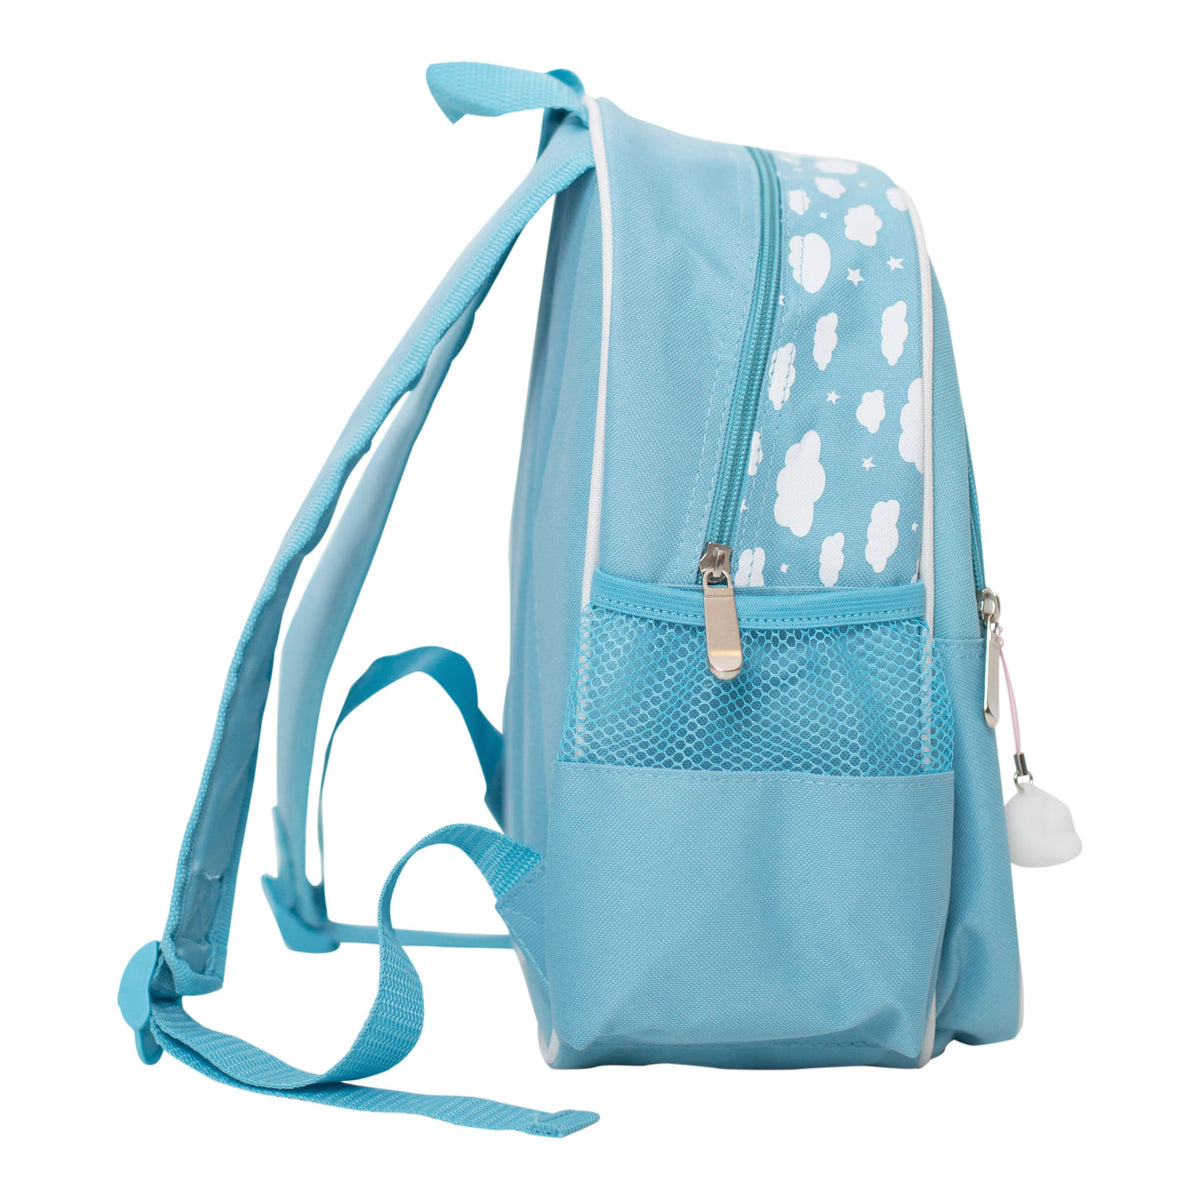 a-little-lovely-company-backpack-cloud-blue- (3)